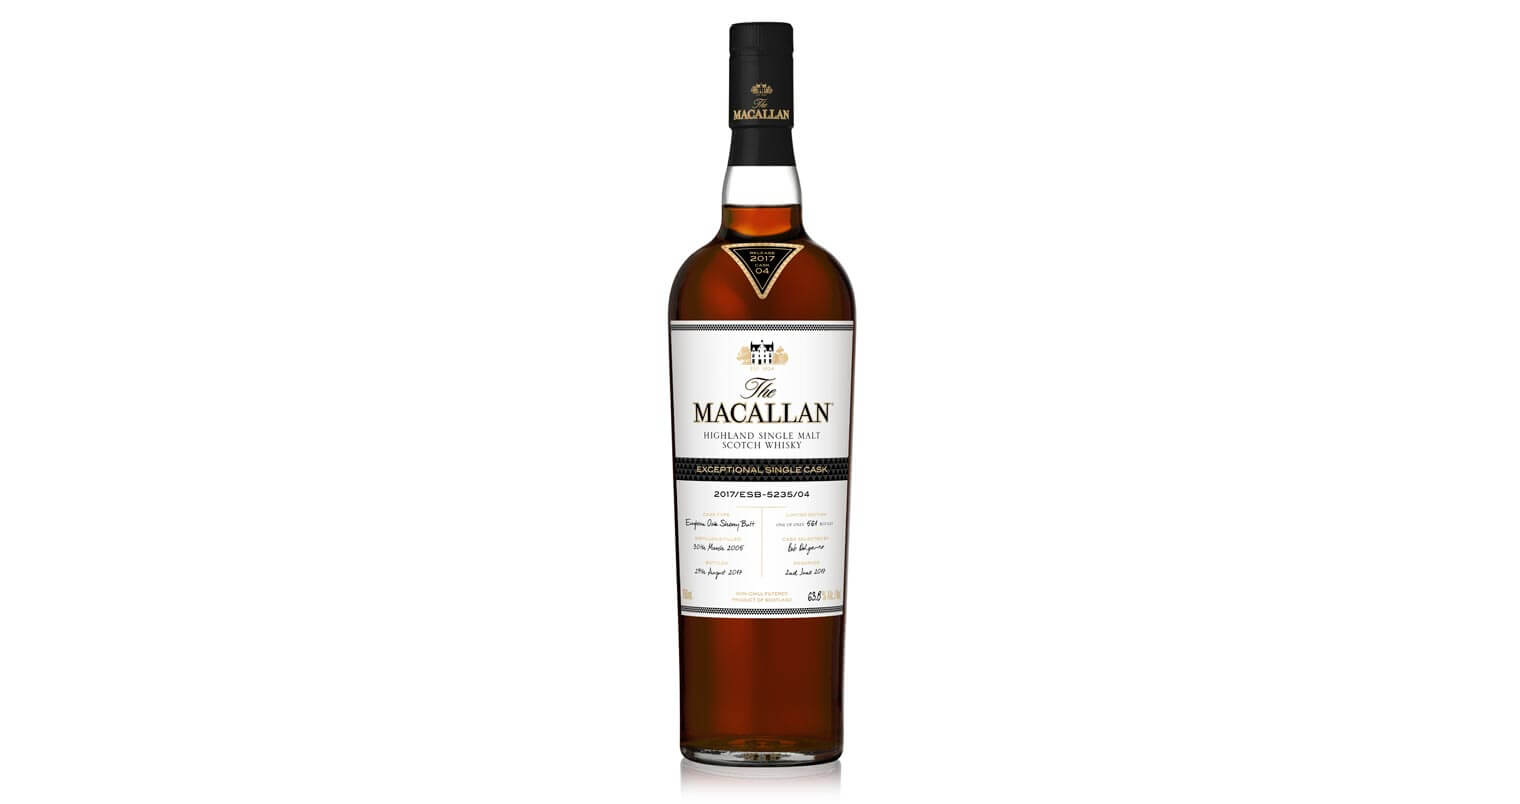 The Macallan Releases Exceptional Single Cask Range